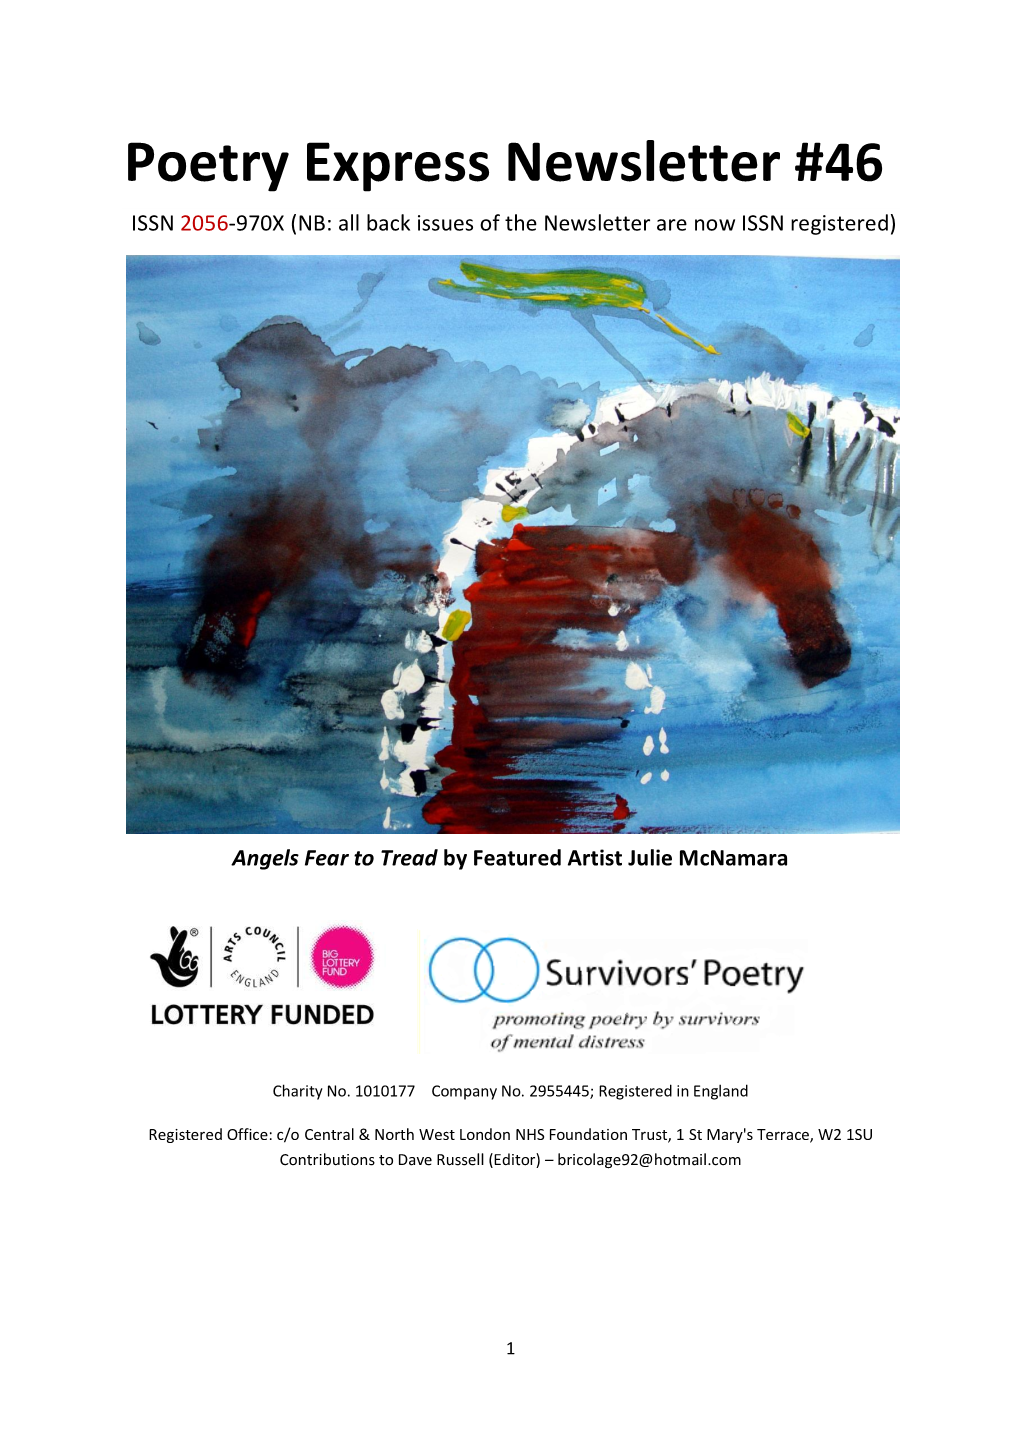 Poetry Express Newsletter #46 ISSN 2056-970X (NB: All Back Issues of the Newsletter Are Now ISSN Registered)